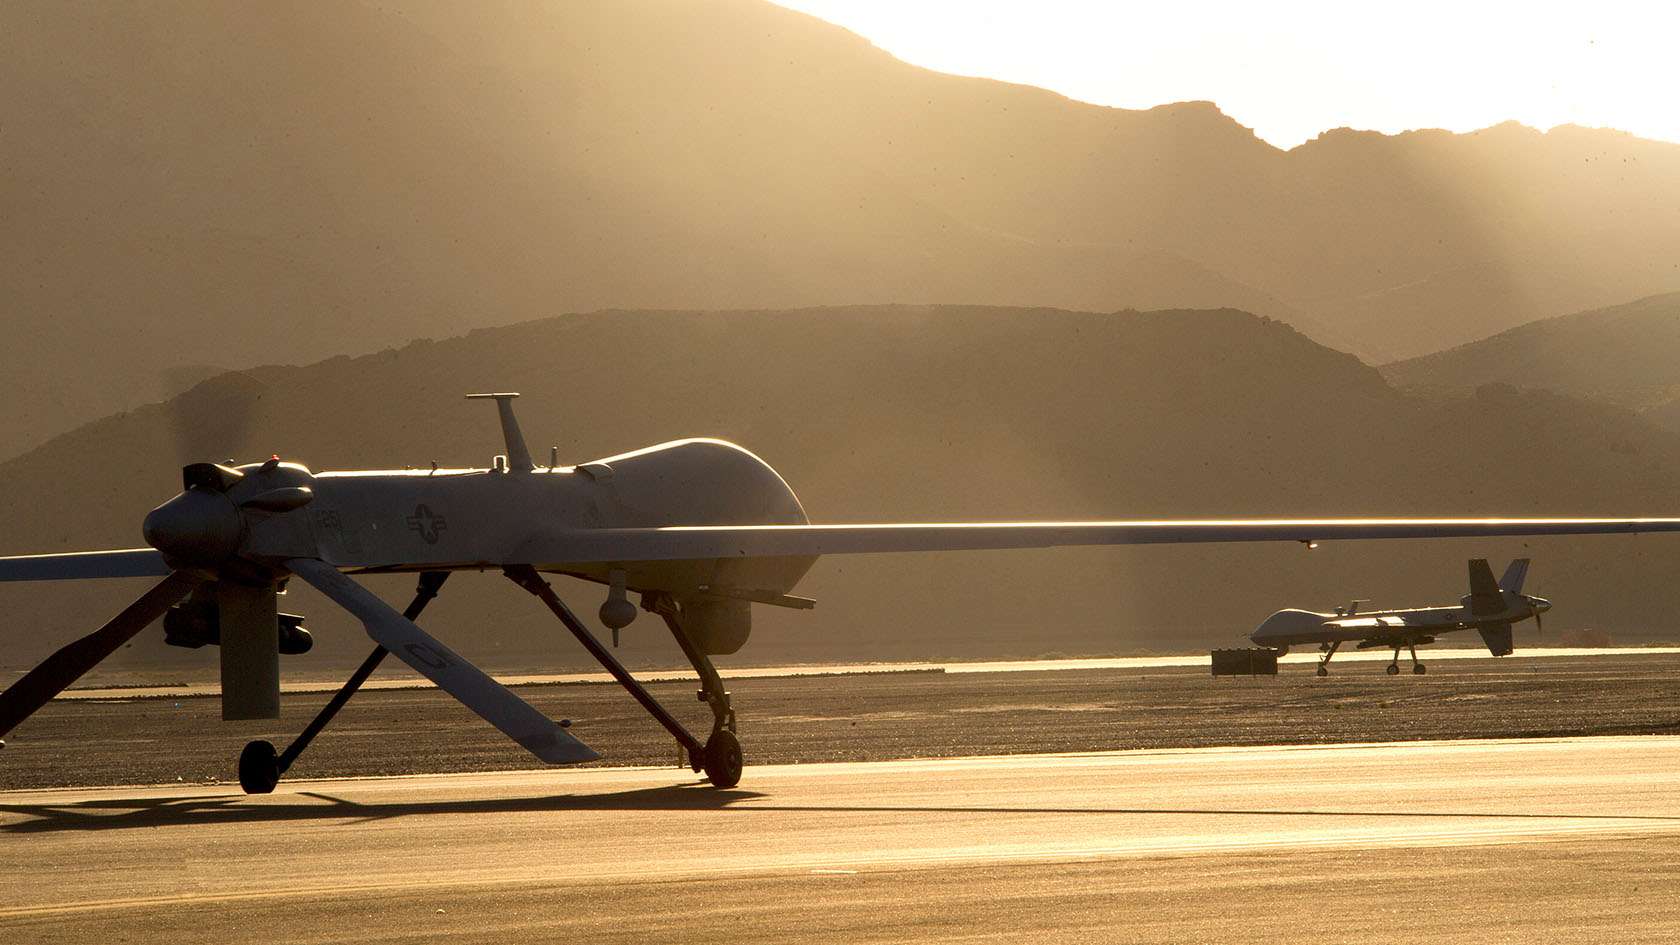 remotely piloted aircraft on a runway